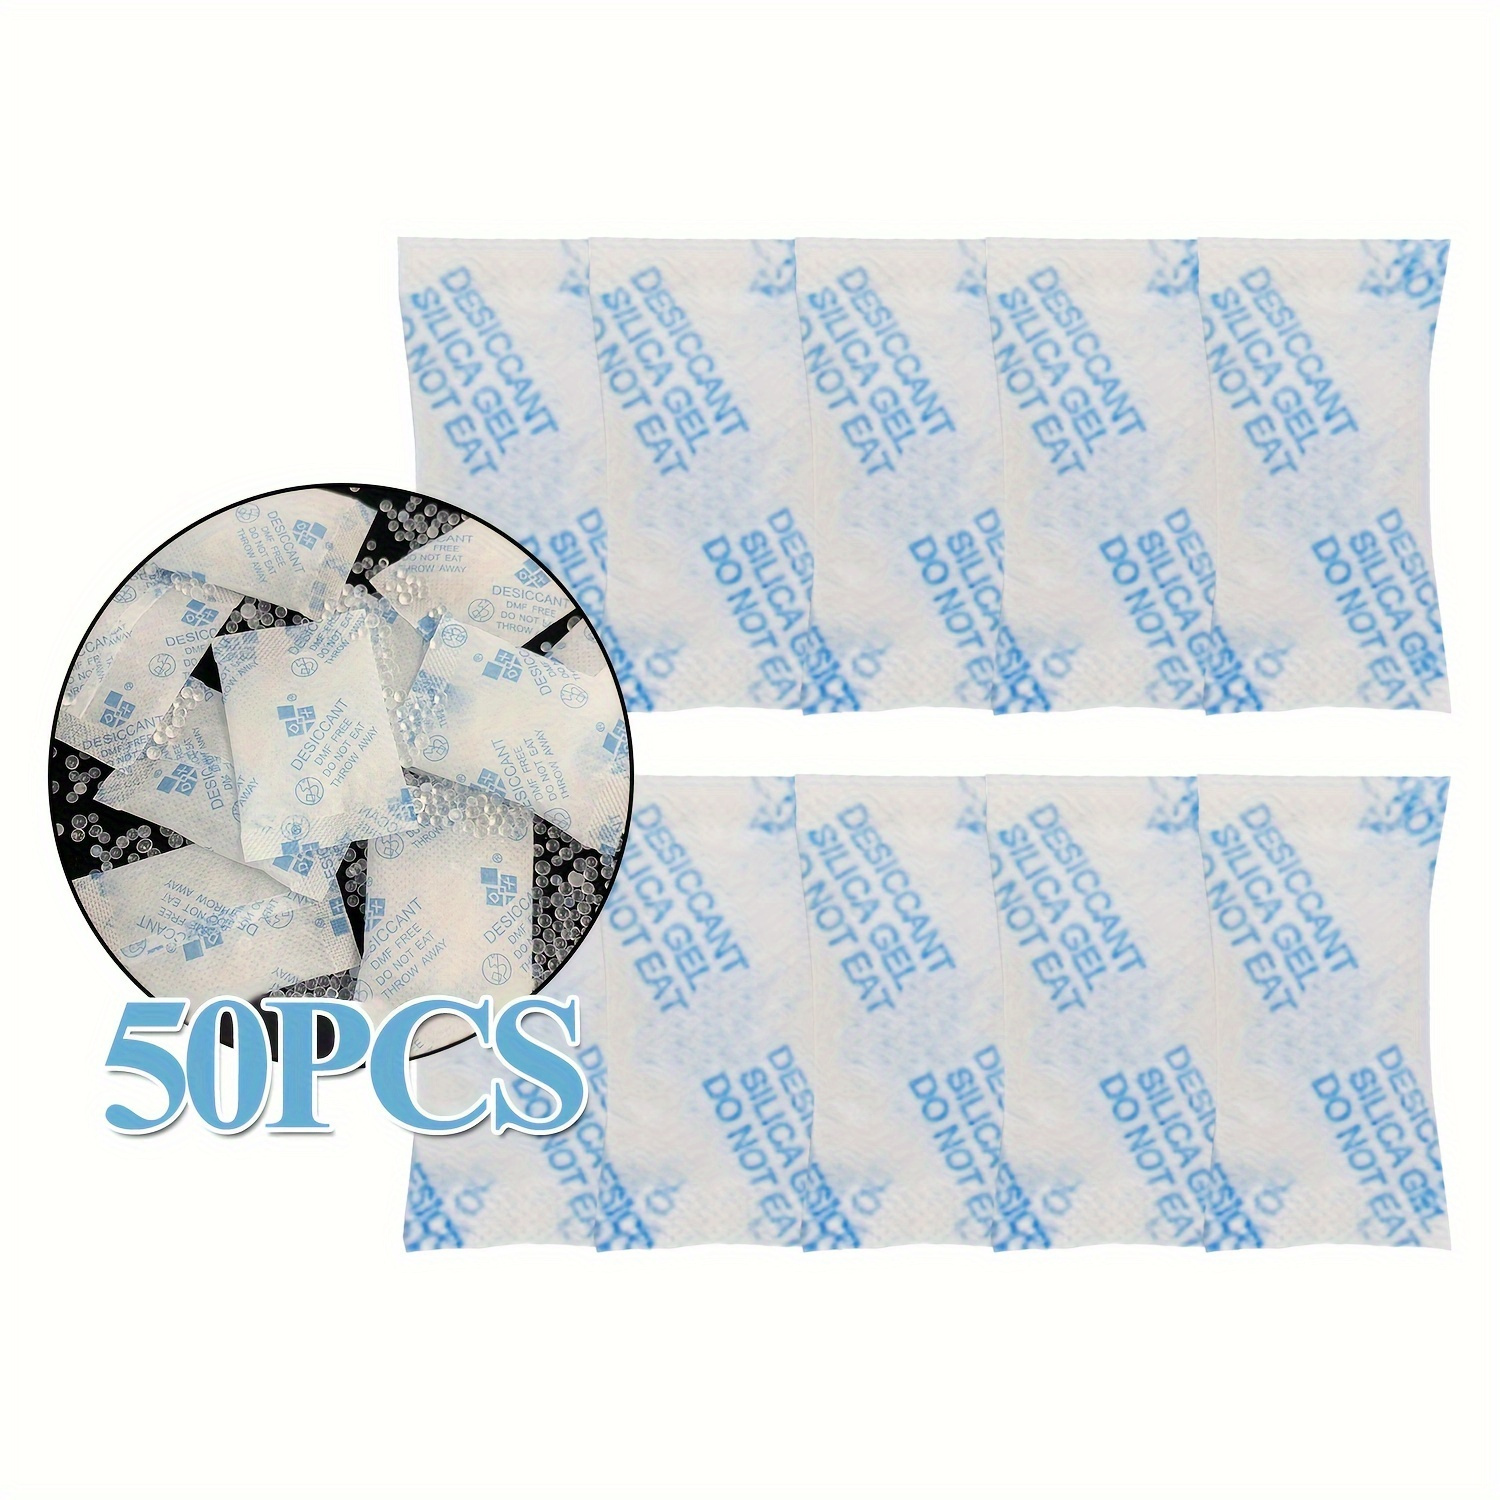  Anything dehumidification silica gel 1kg : Home & Kitchen